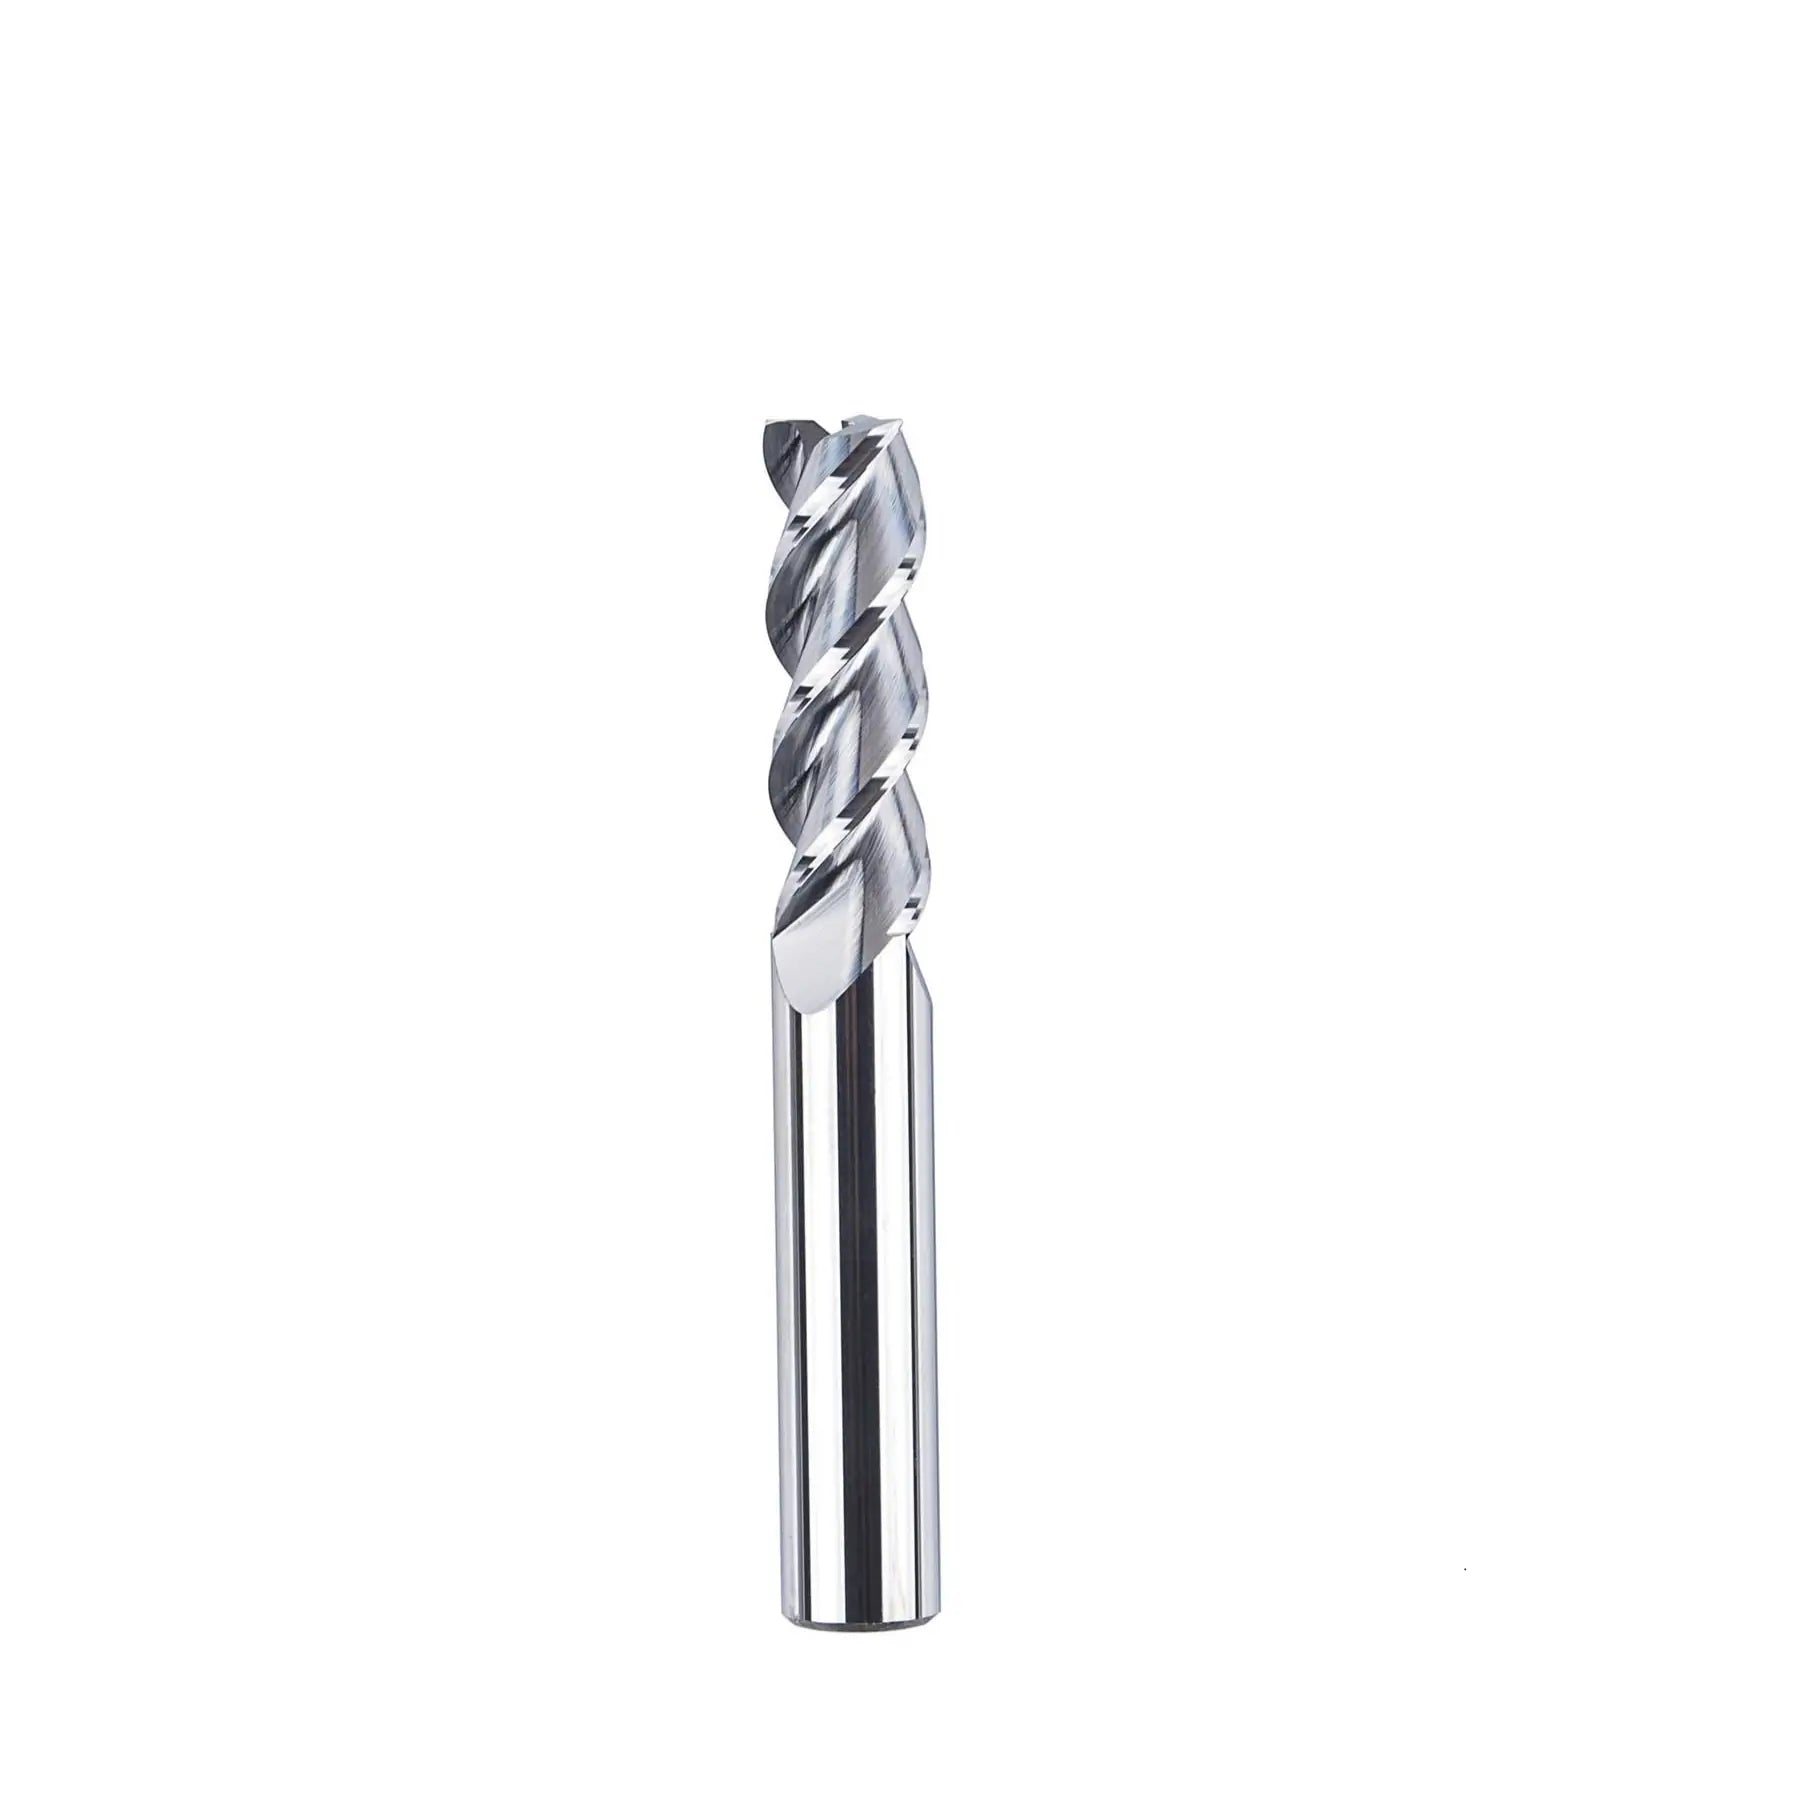 SpeTool EU Solid Carbide 3 Flutes Aluminium Milling Cutter with 8 mm Cutting Diameter x 20 mm Cutting Length, 8 mm Shank End Mill for Aluminium and Plastic